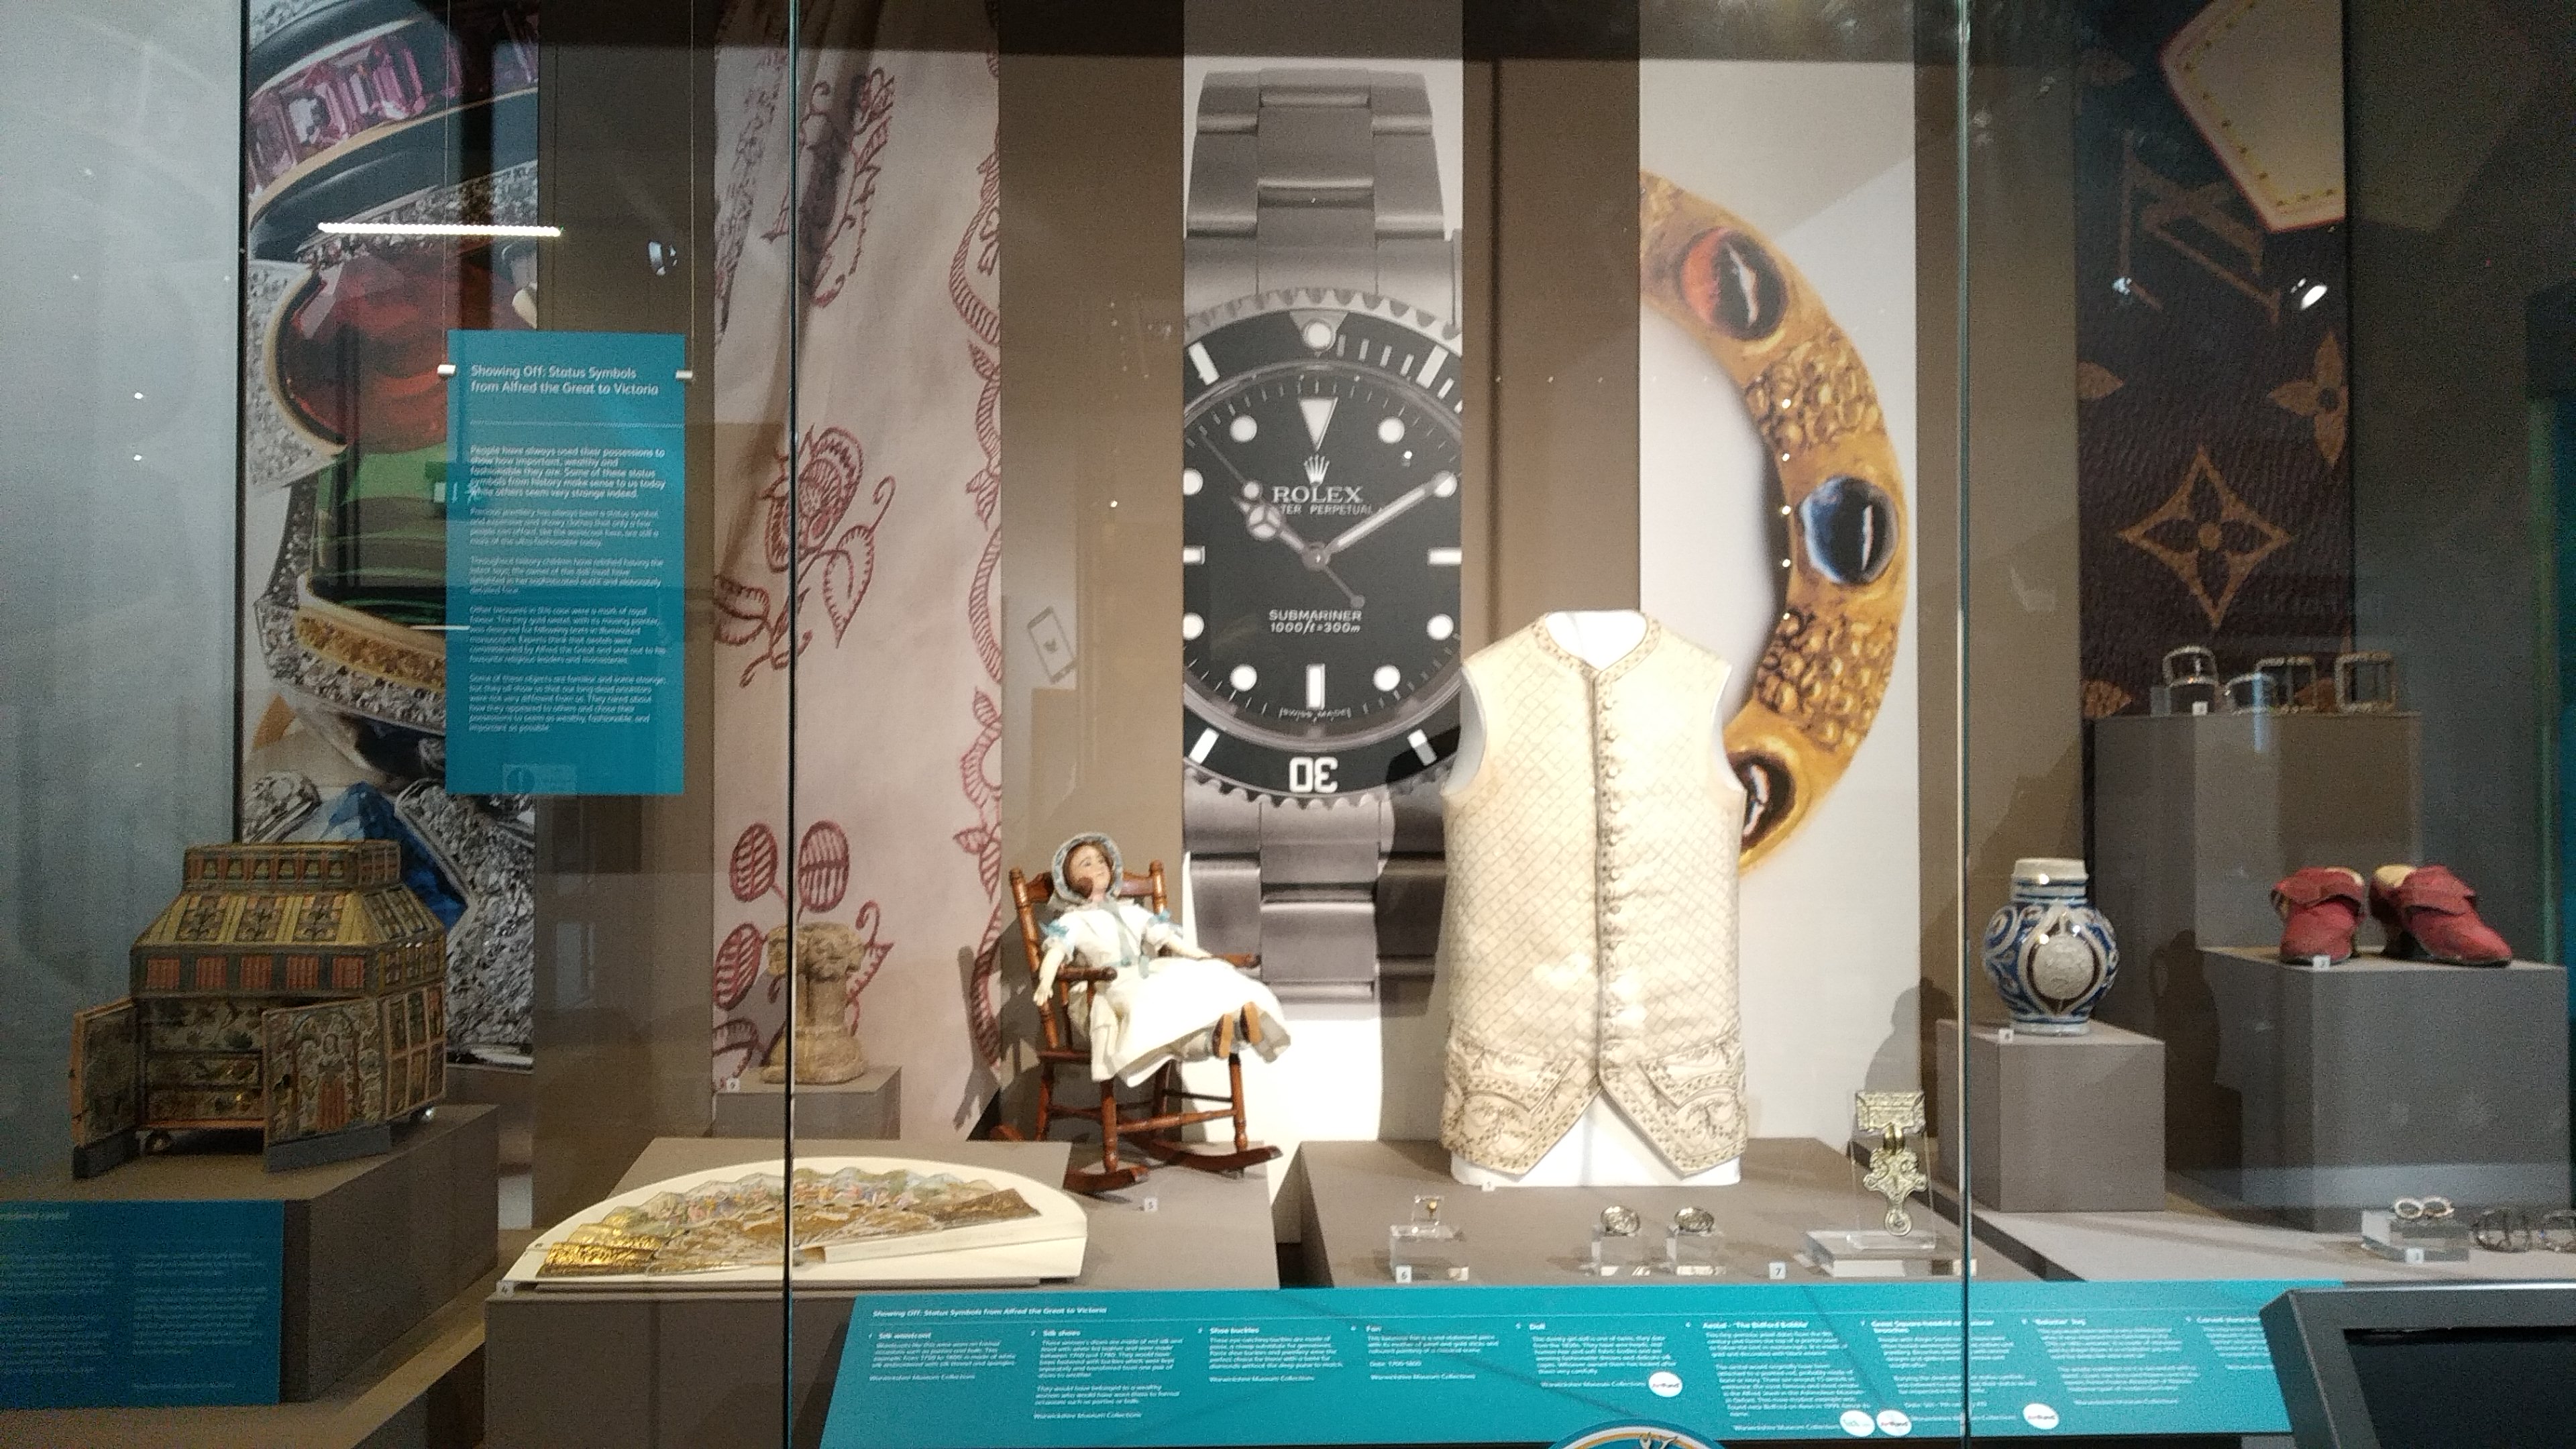 photograph of new display at market hall museum. the display is in a glass case holidng a golden button vest, a vase and a doll among other artefacts.